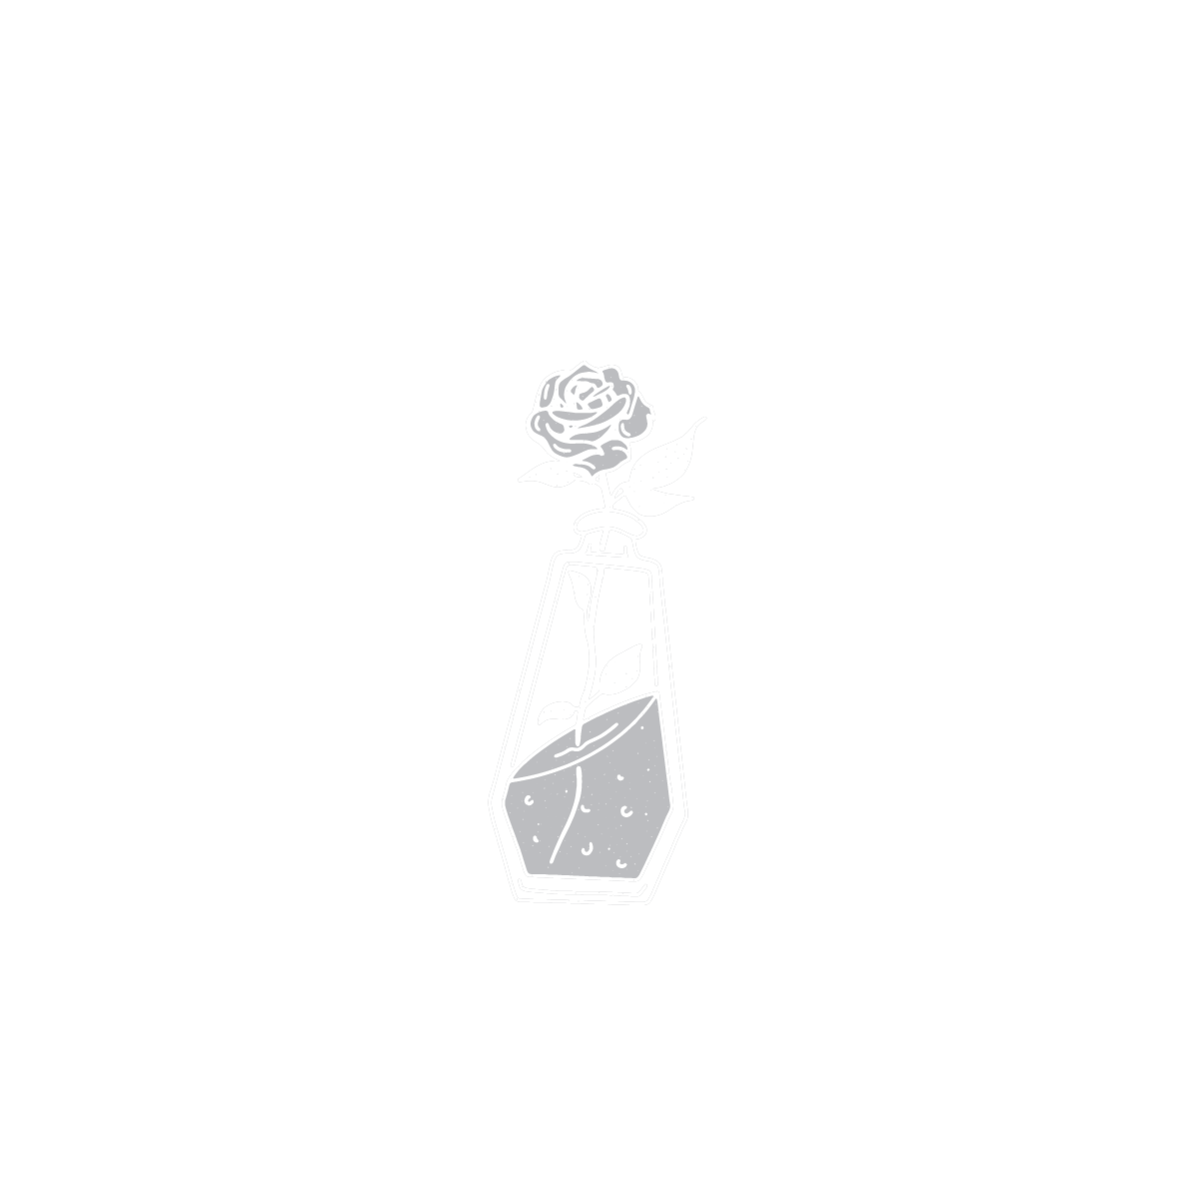 A white circular logo for Violent Delights Tattoo Club and a coffin shaped poison bottle and rose.